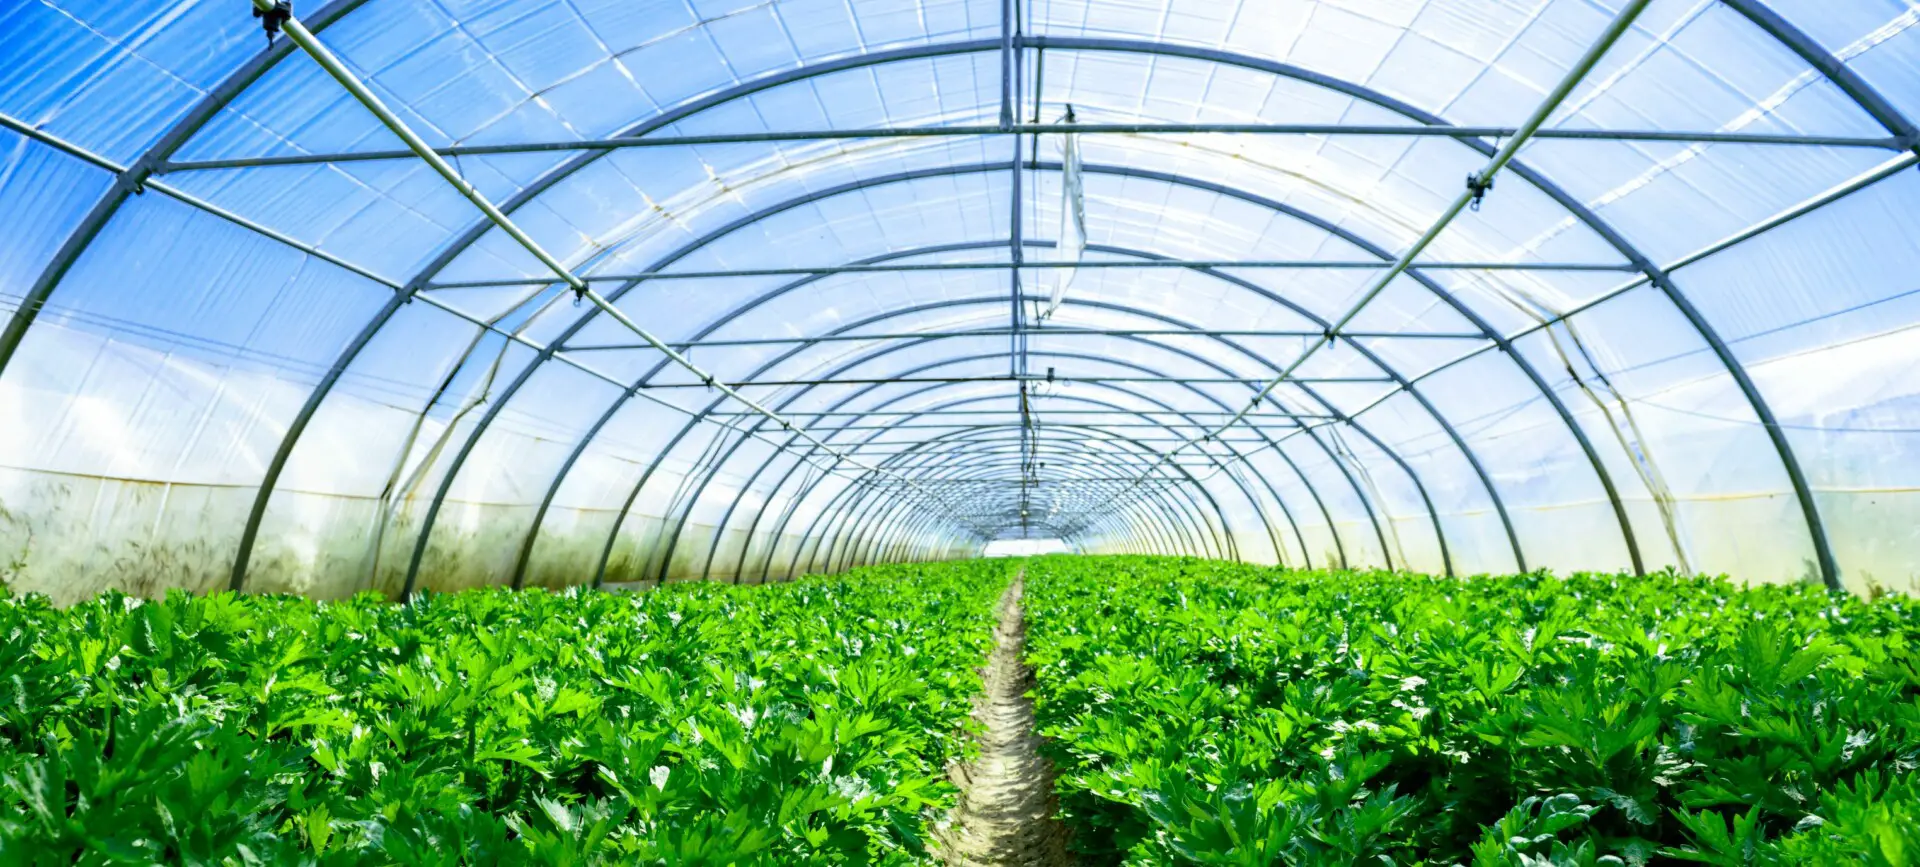 Are Greenhouses Bad for the Environment? 5 Facts You Should Know